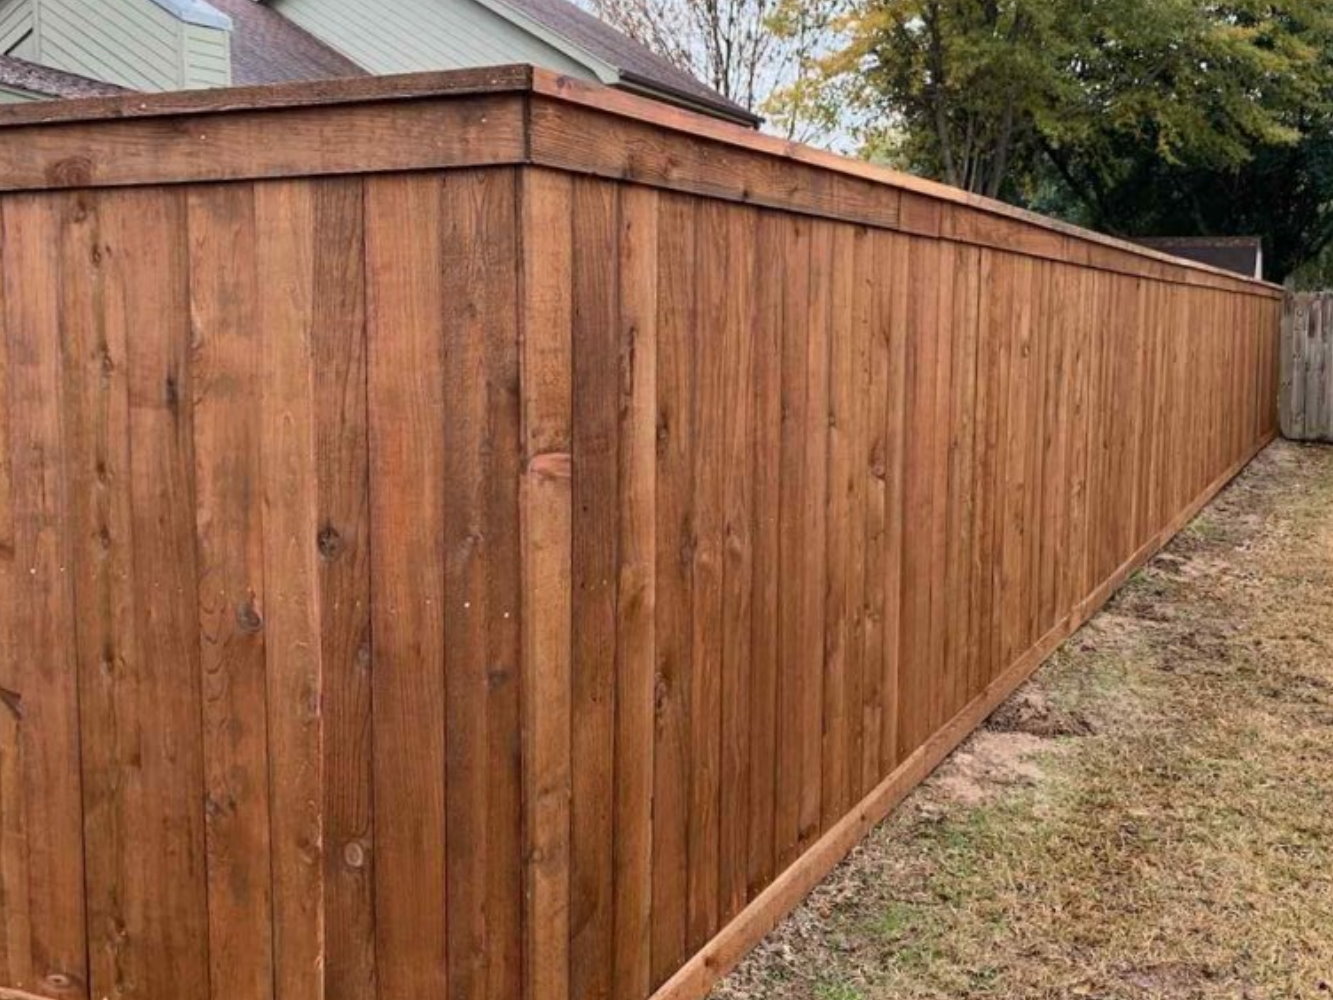 Foreman AK cap and trim style wood fence